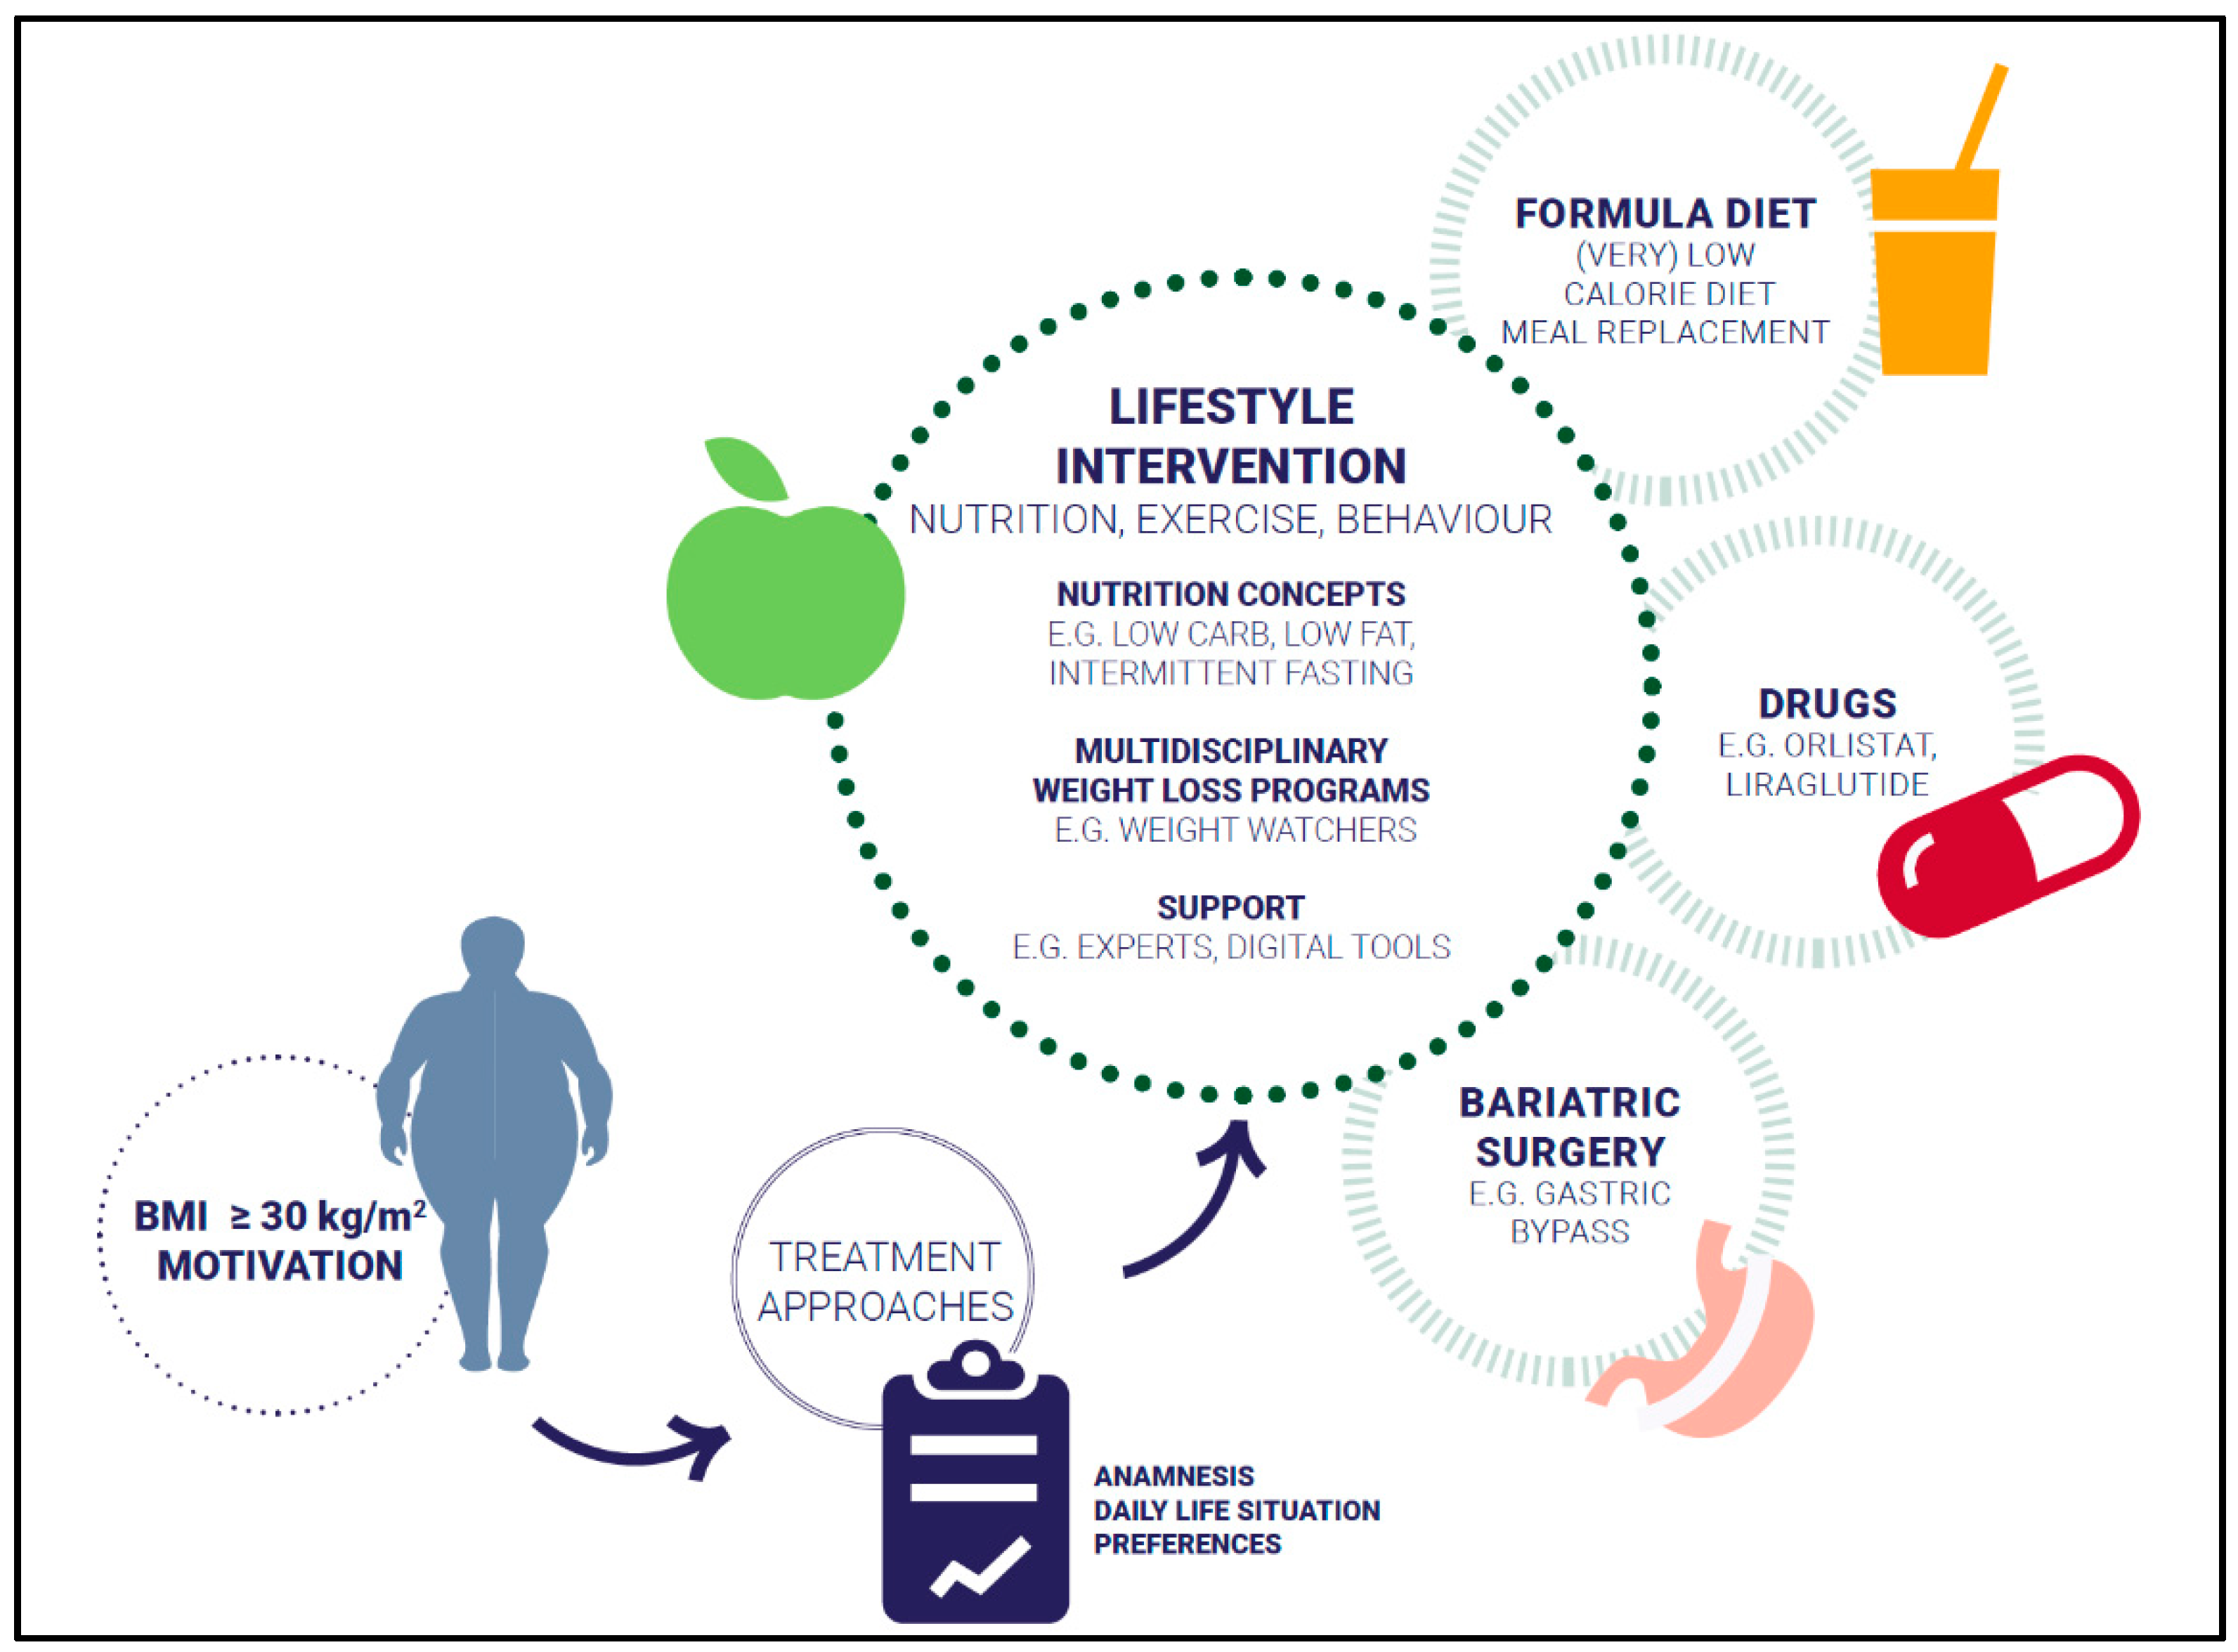 Obesity and lifestyle changes